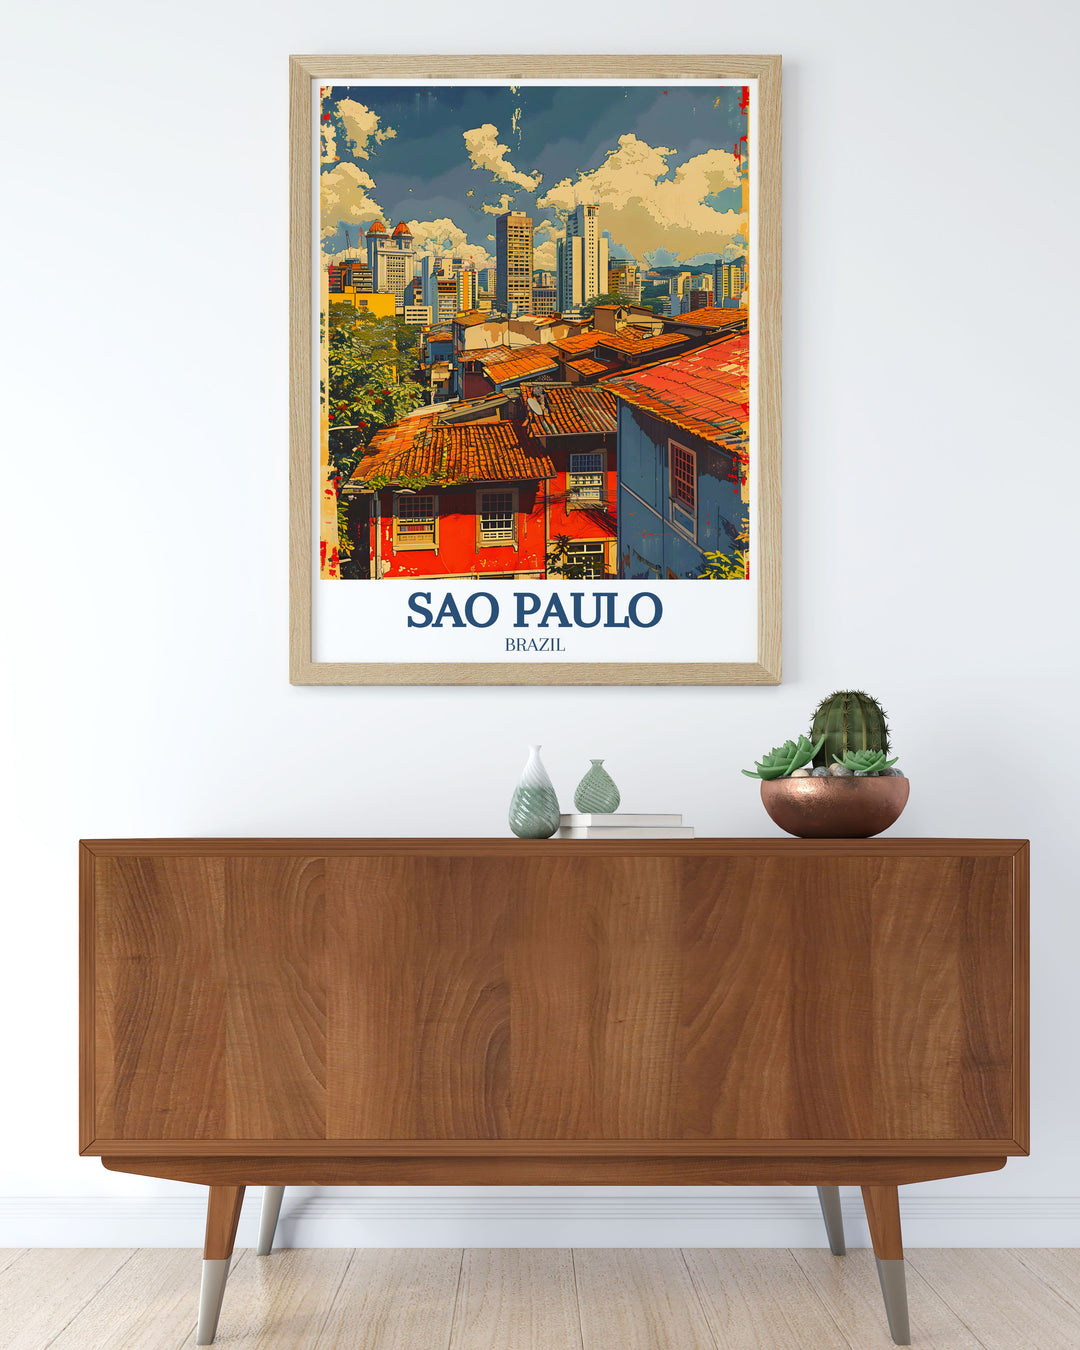 This detailed print of the Sao Paulo skyline offers a stunning depiction of the citys urban landscape, including modern skyscrapers and historic buildings, ideal for architecture enthusiasts.